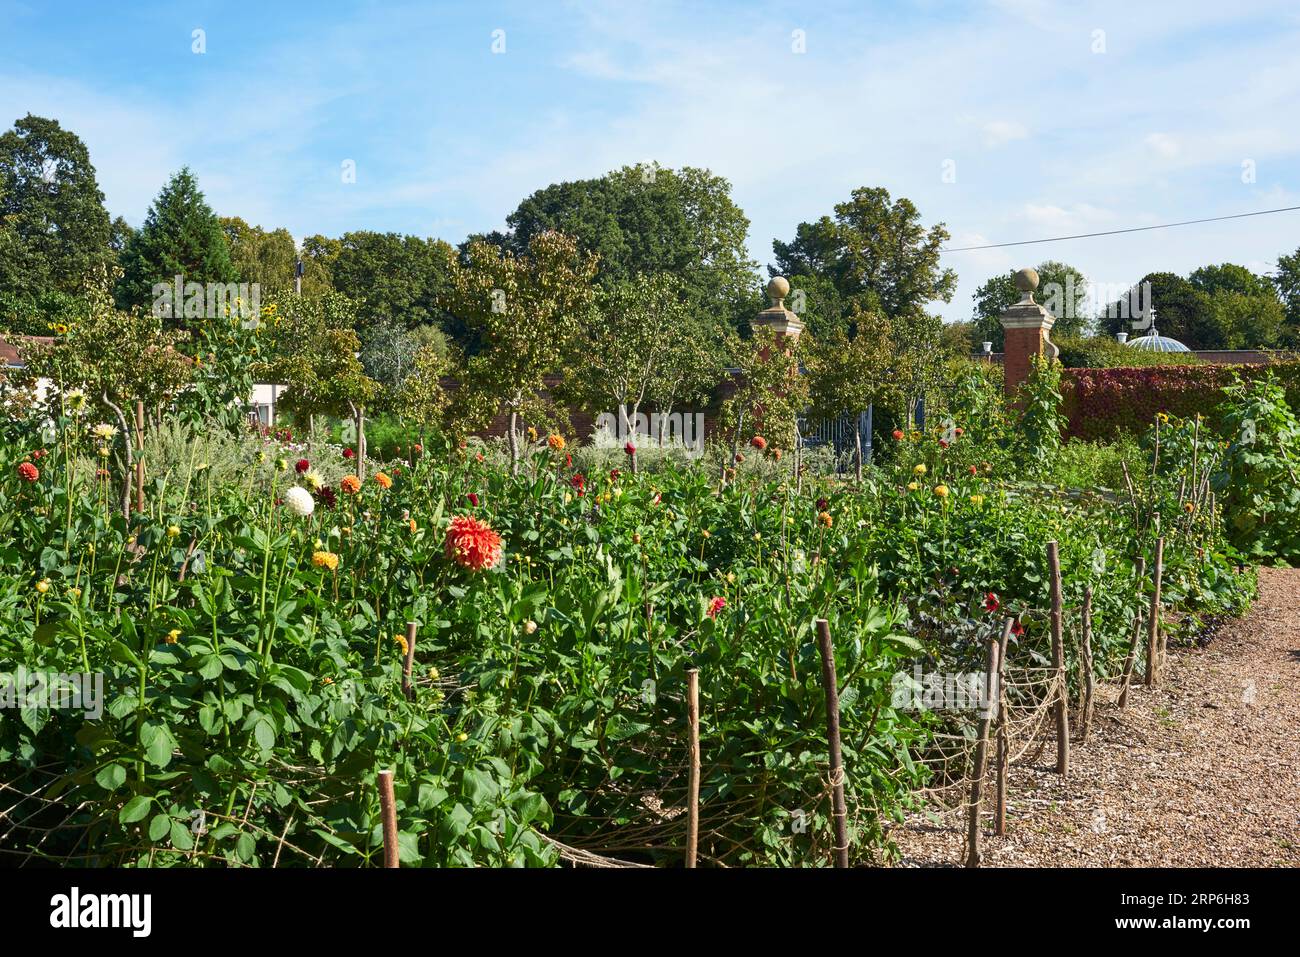 edible plants and flowers in the historic 17th century kitchen garden in the grounds surrounding chiswick house chiswick london uk 2RP6H83